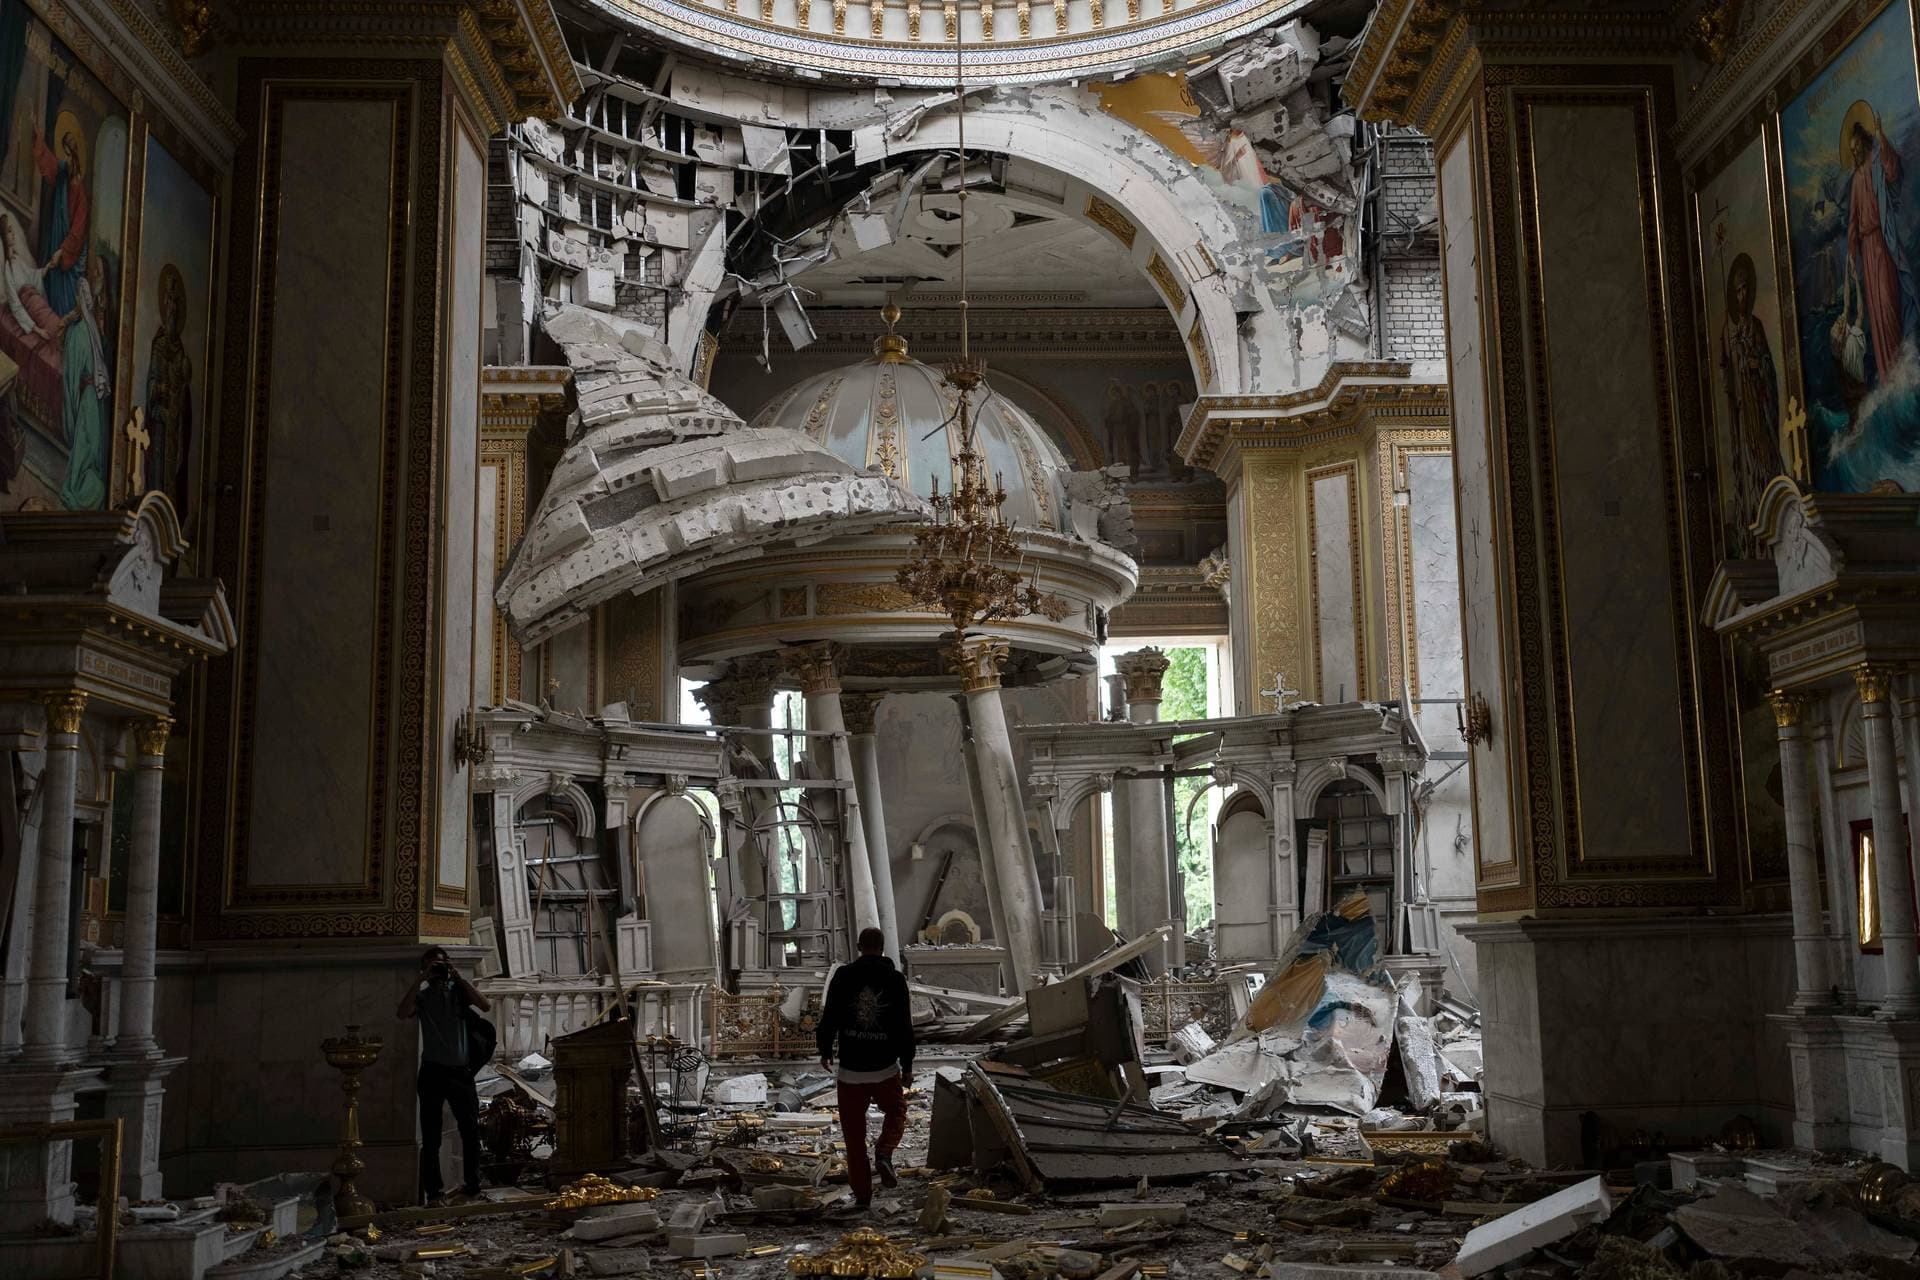 Church personnel inspect damages inside the Odesa Transfiguration Cathedral in Odesa